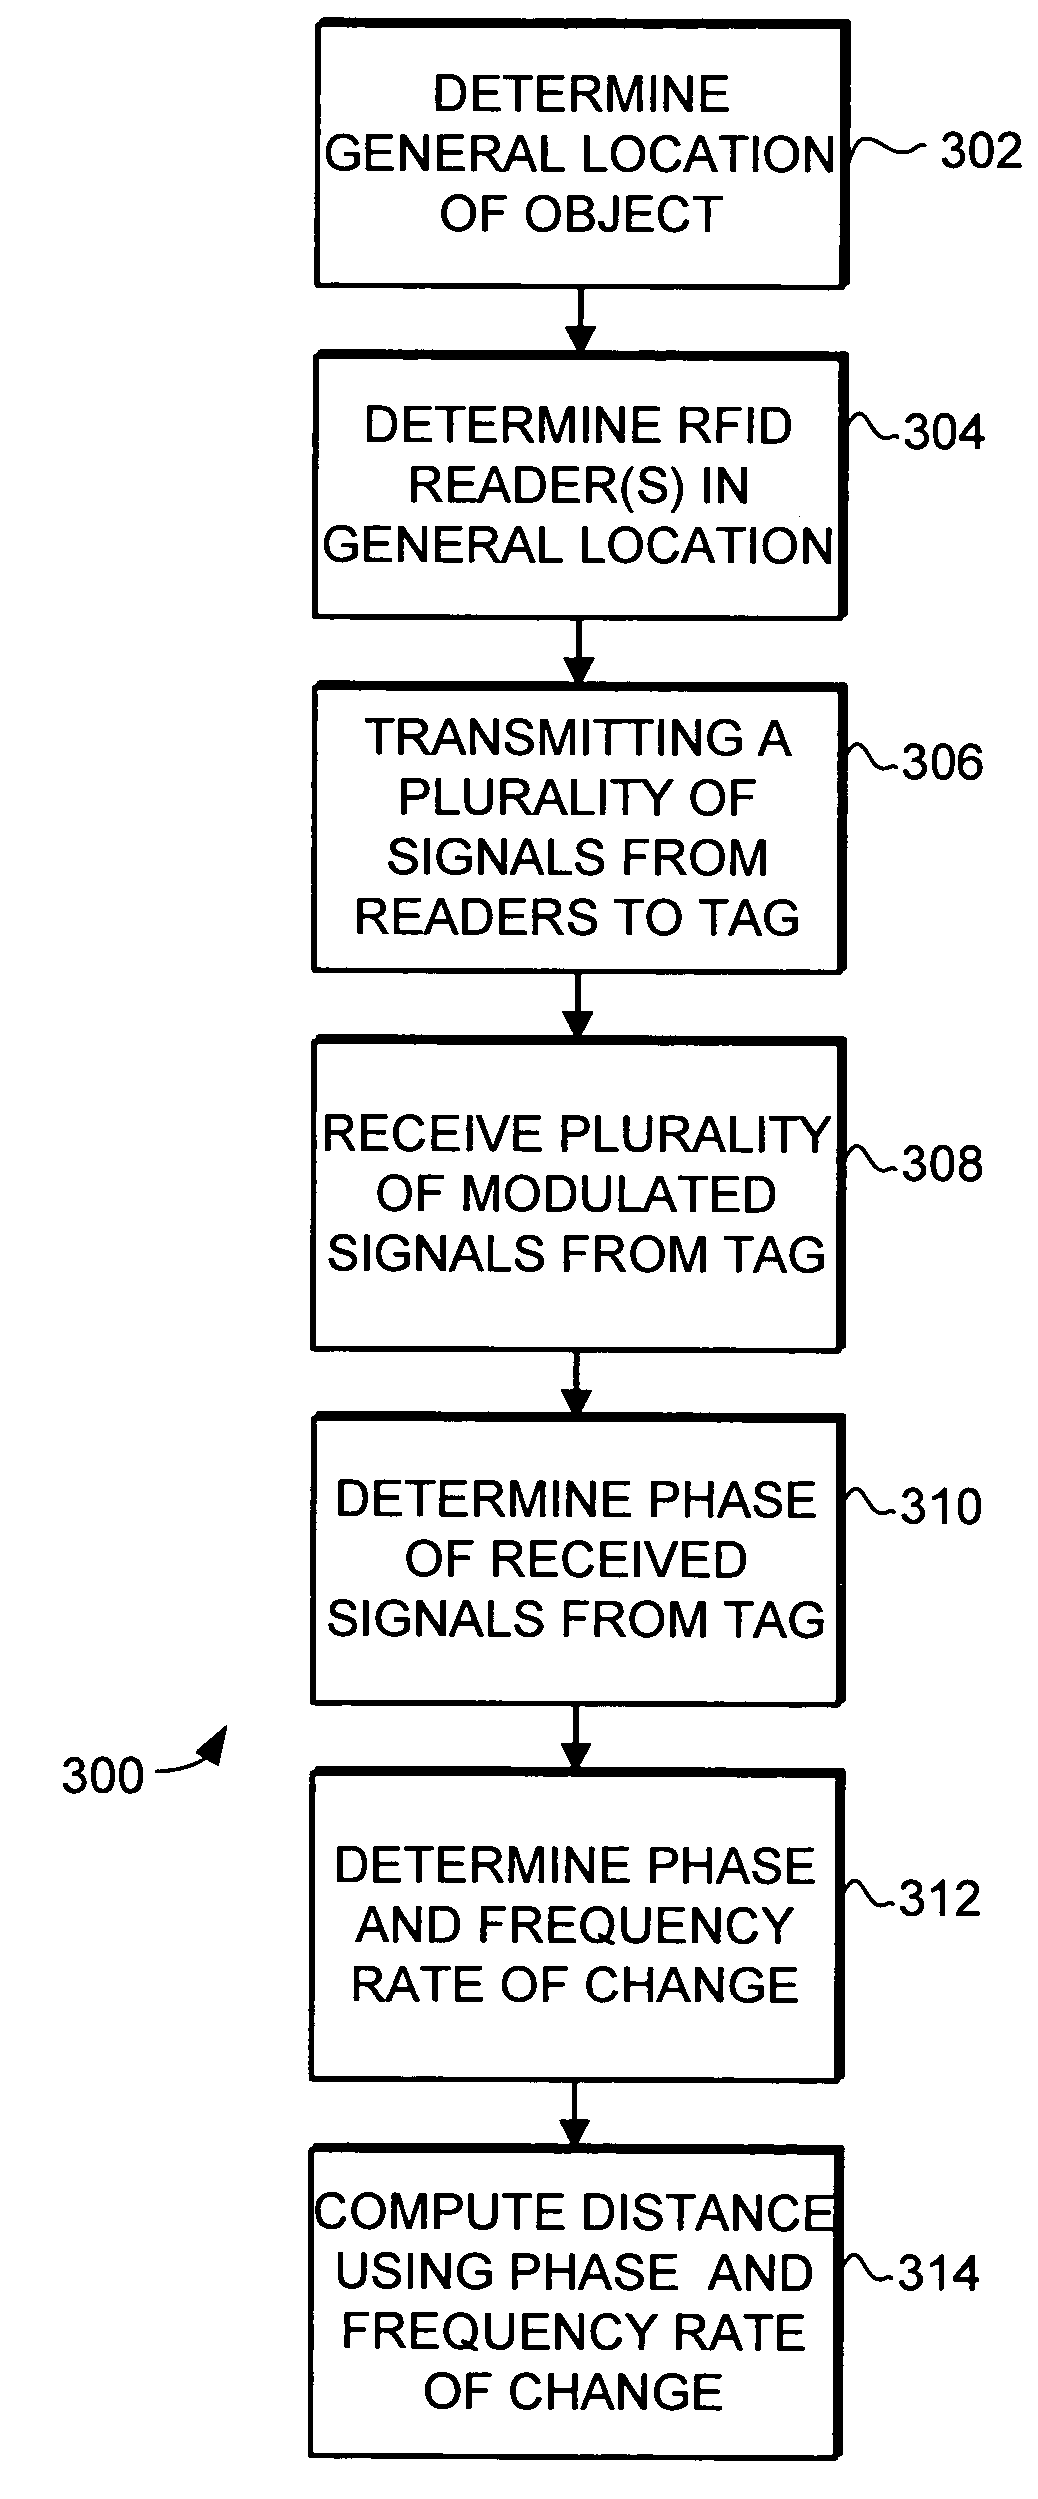 Multi-resolution object location system and method